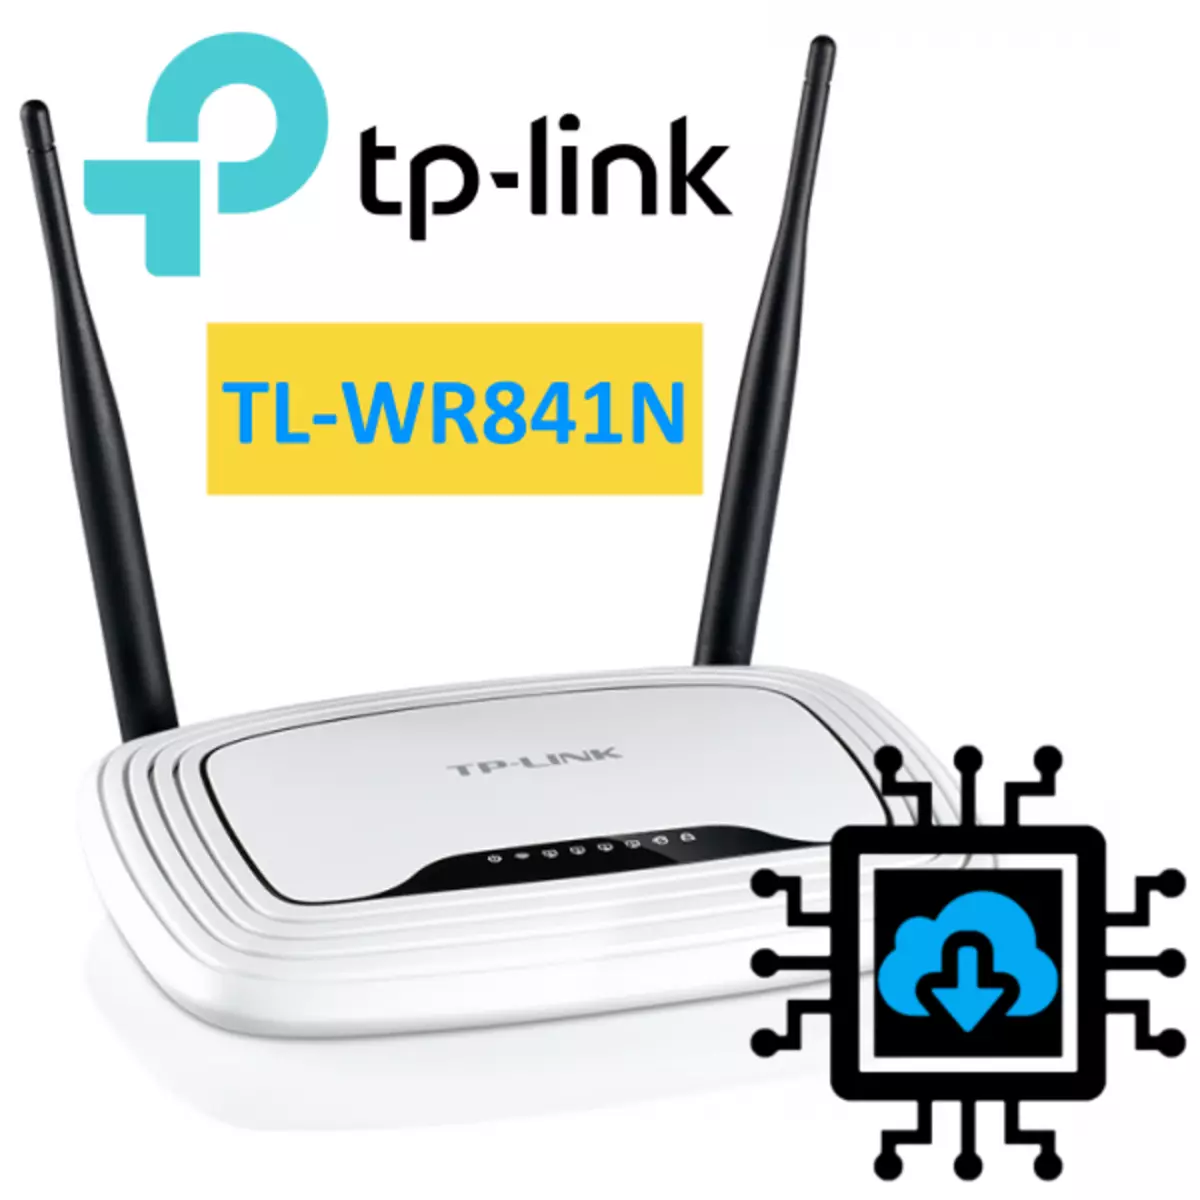 TP-LINK TL-WR841N Router Firmware